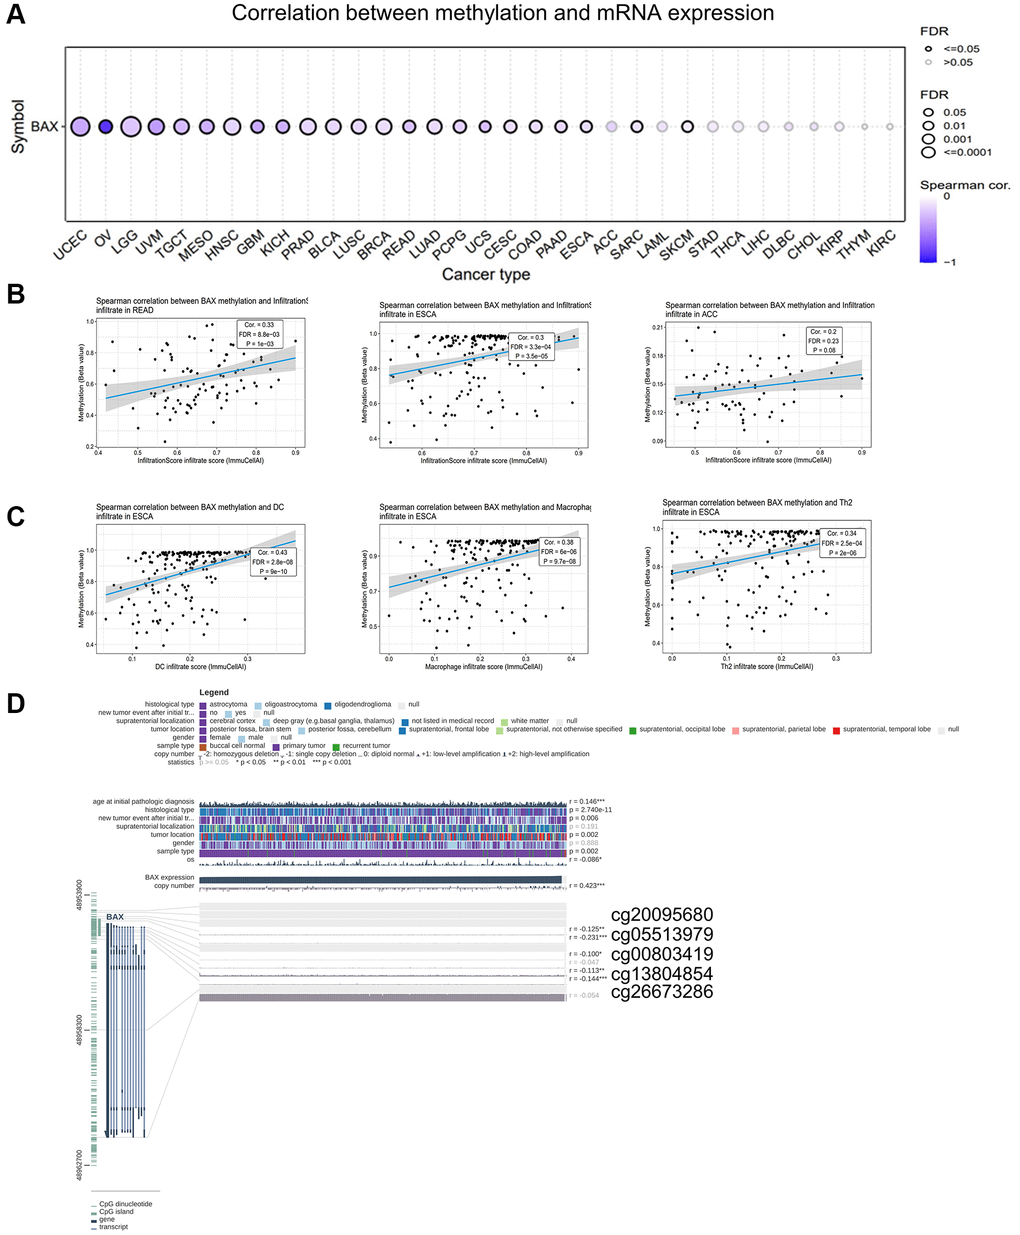 Analysis of BAX methylation in pan-cancer. (A) A Spearman association between BAX methylation and mRNA expression was performed in pan-cancer. (B) The top three with the highest correlation between BAX methylation and immune infiltration. (P C) The top three with the highest correlation between BAX methylation and immune cells in ESCA. (P D) The methylation sites of BAX DNA sequence related to its gene expression.